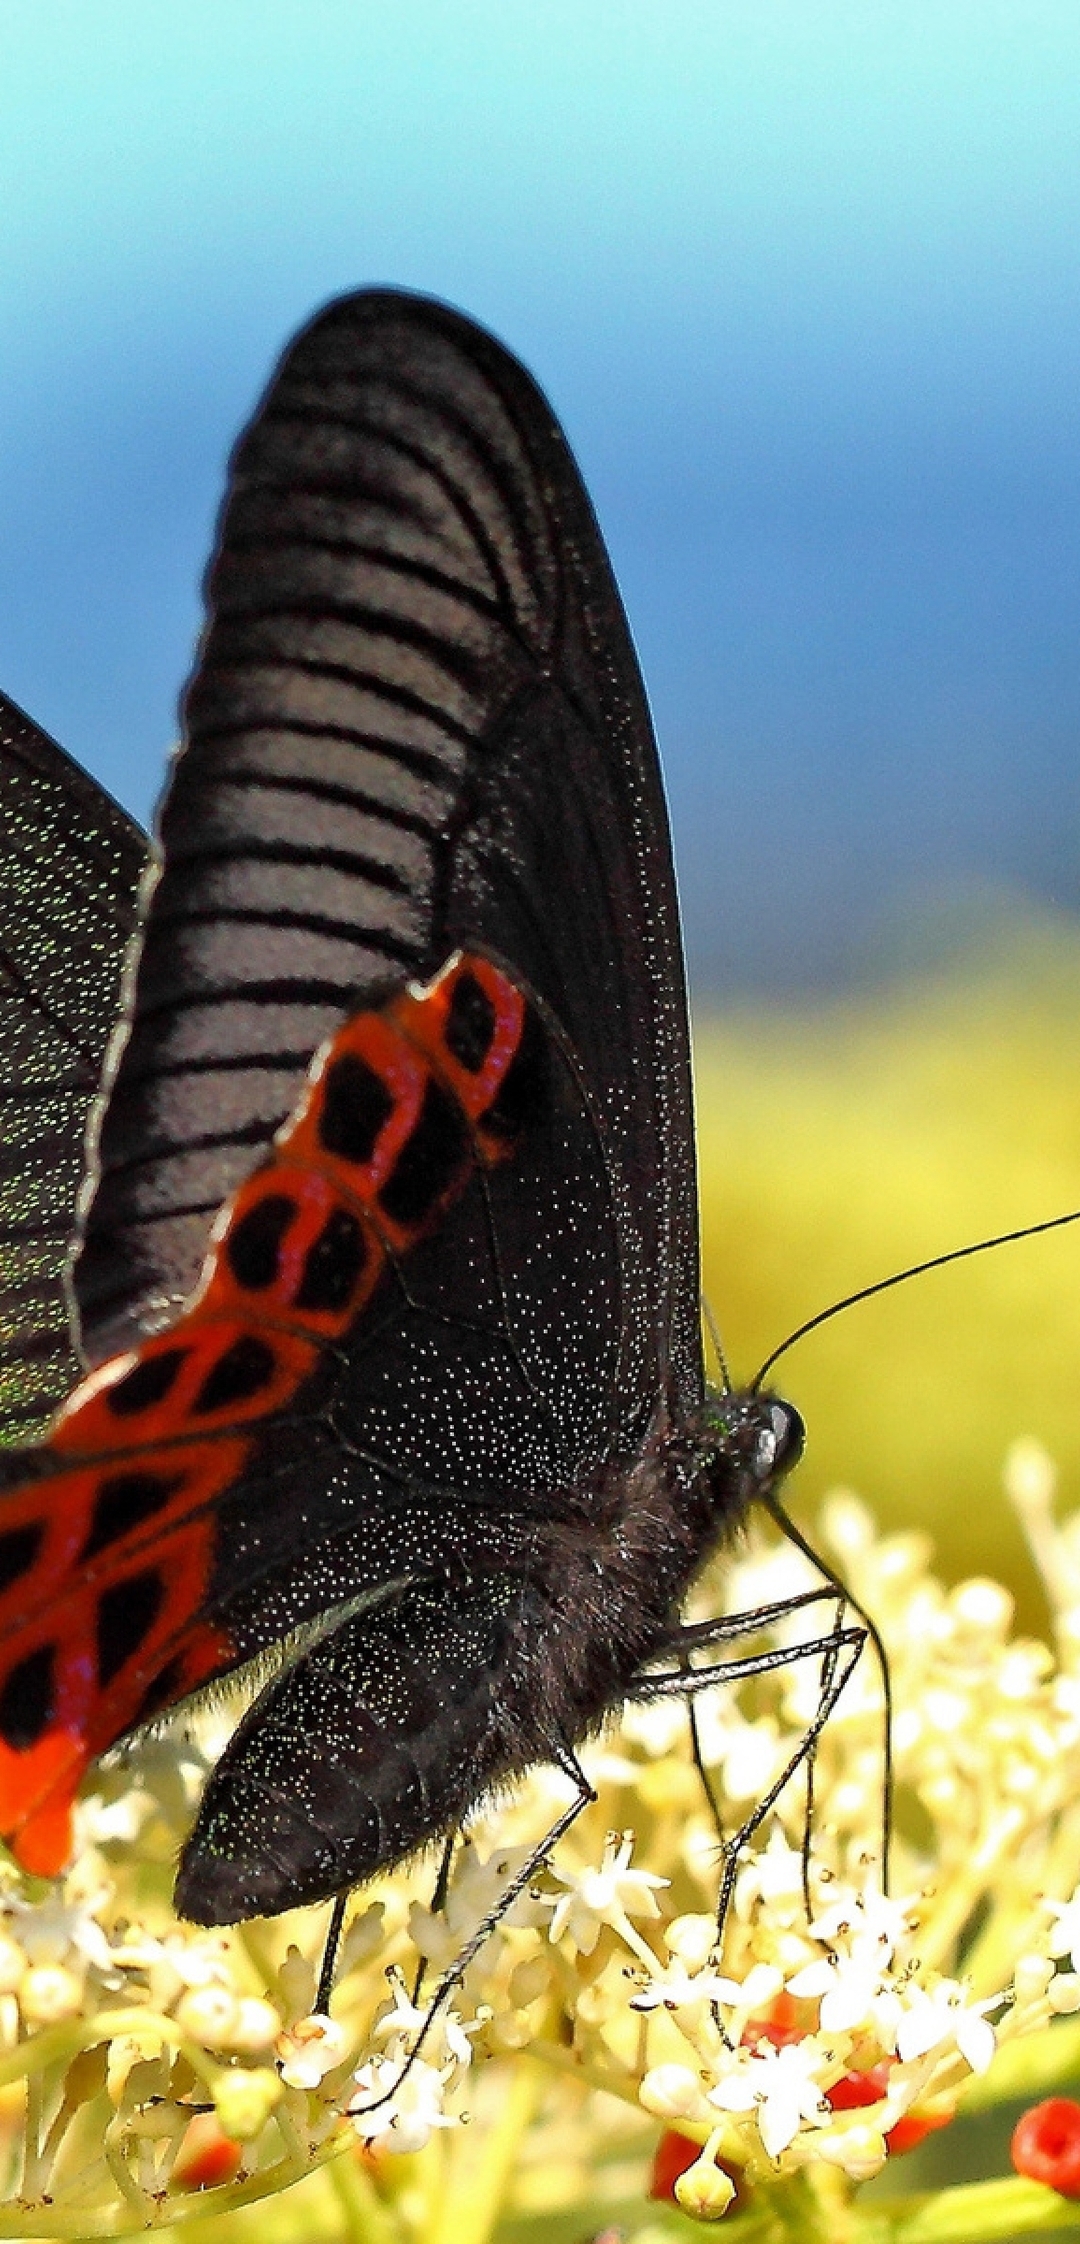 Image: Butterfly, swallowtail Papilio, wings, flower, nectar